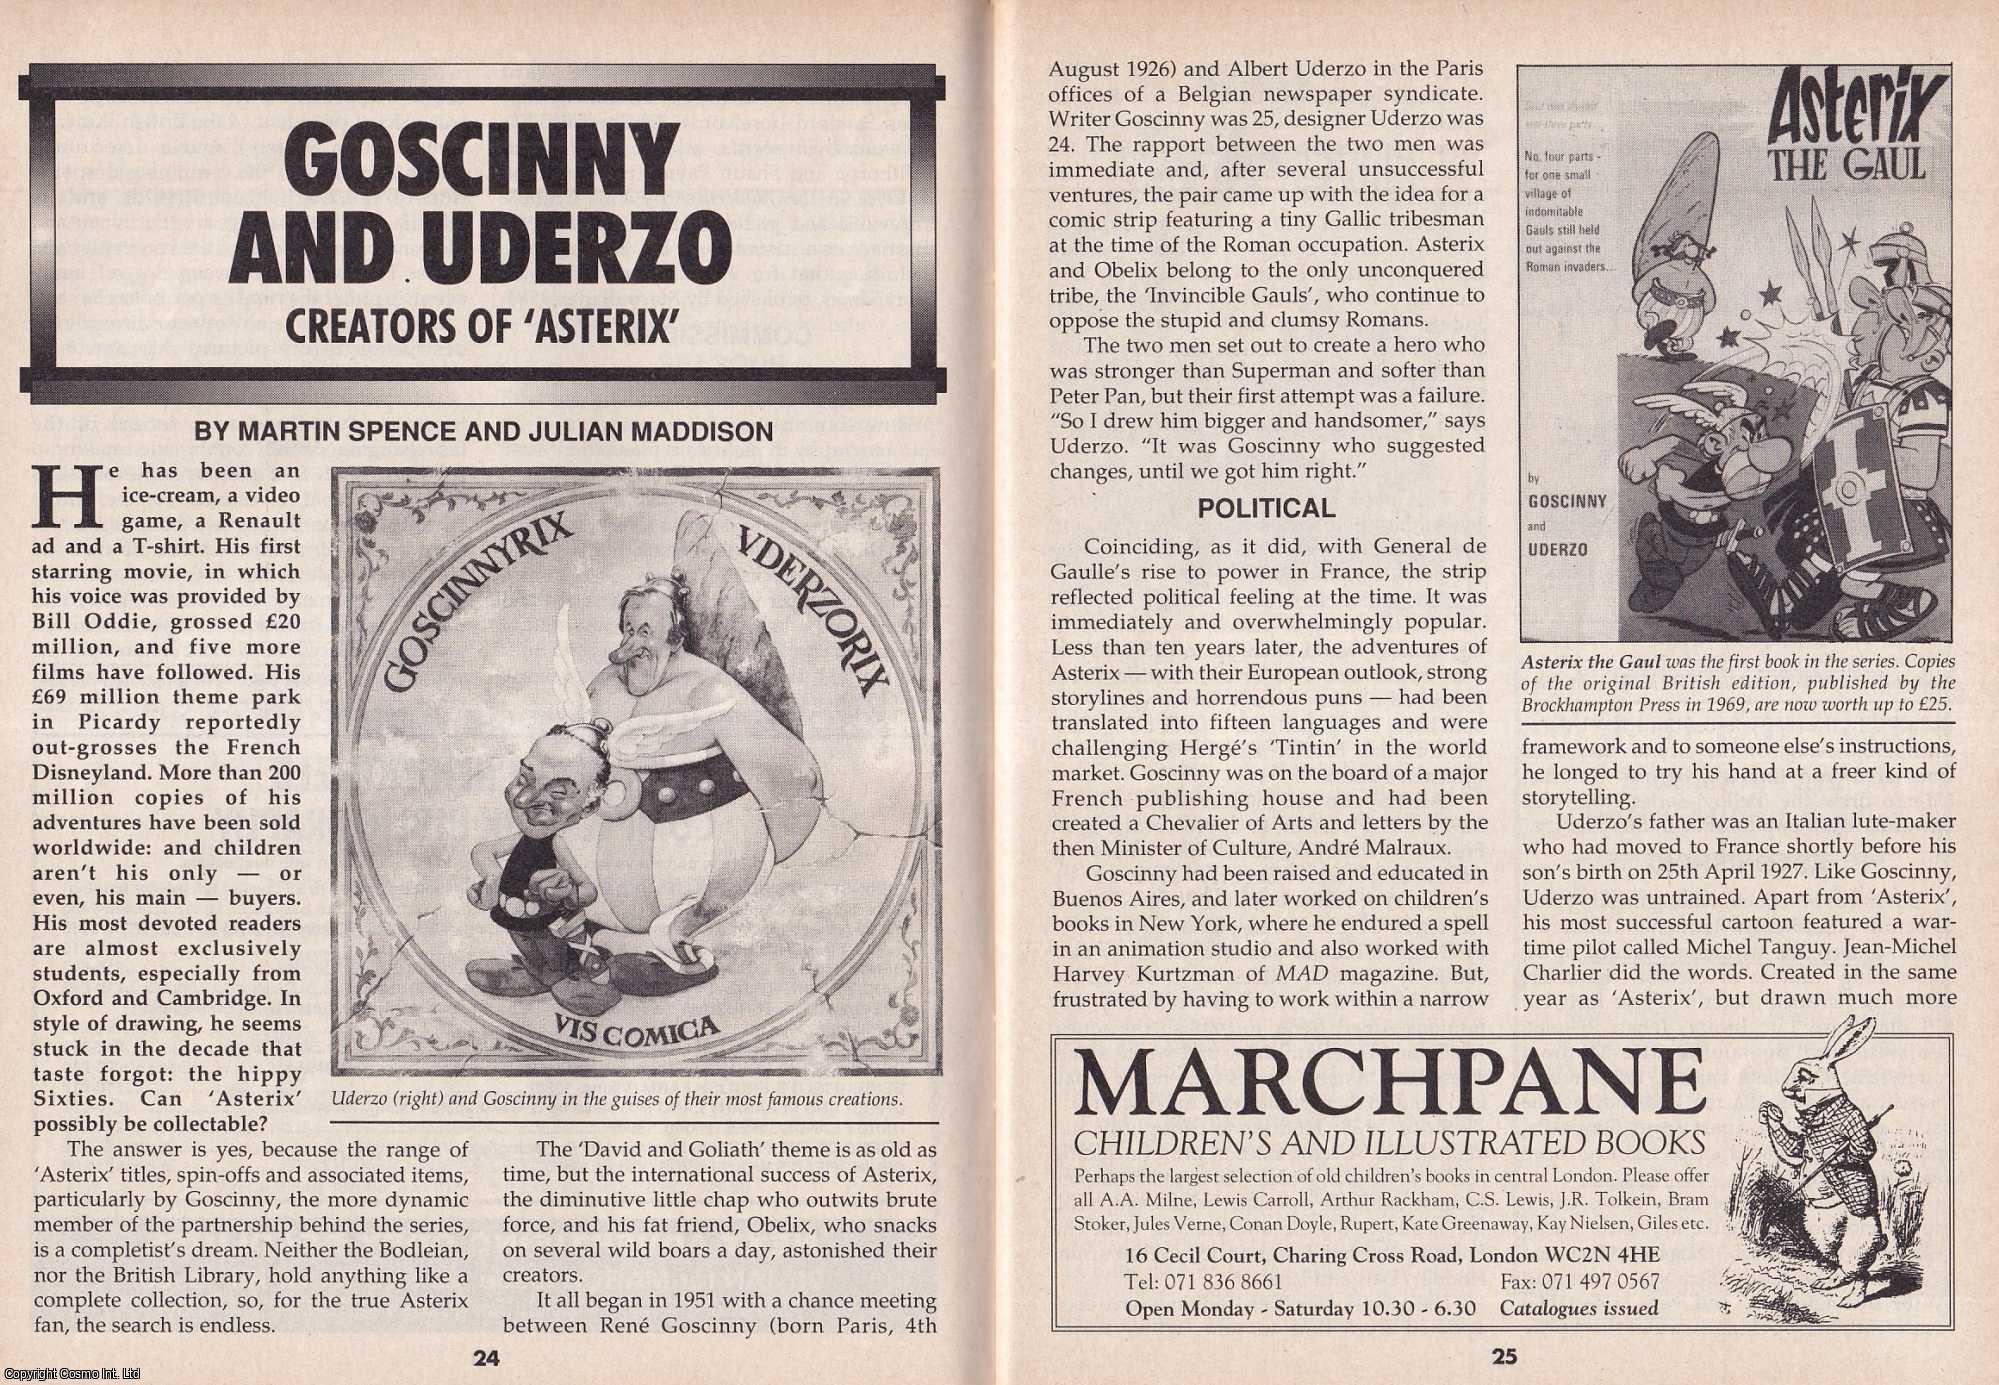 Martin Spence & Julian Maddison - Goscinny and Uderzo. Creators of Asterix. This is an original article separated from an issue of The Book & Magazine Collector publication.